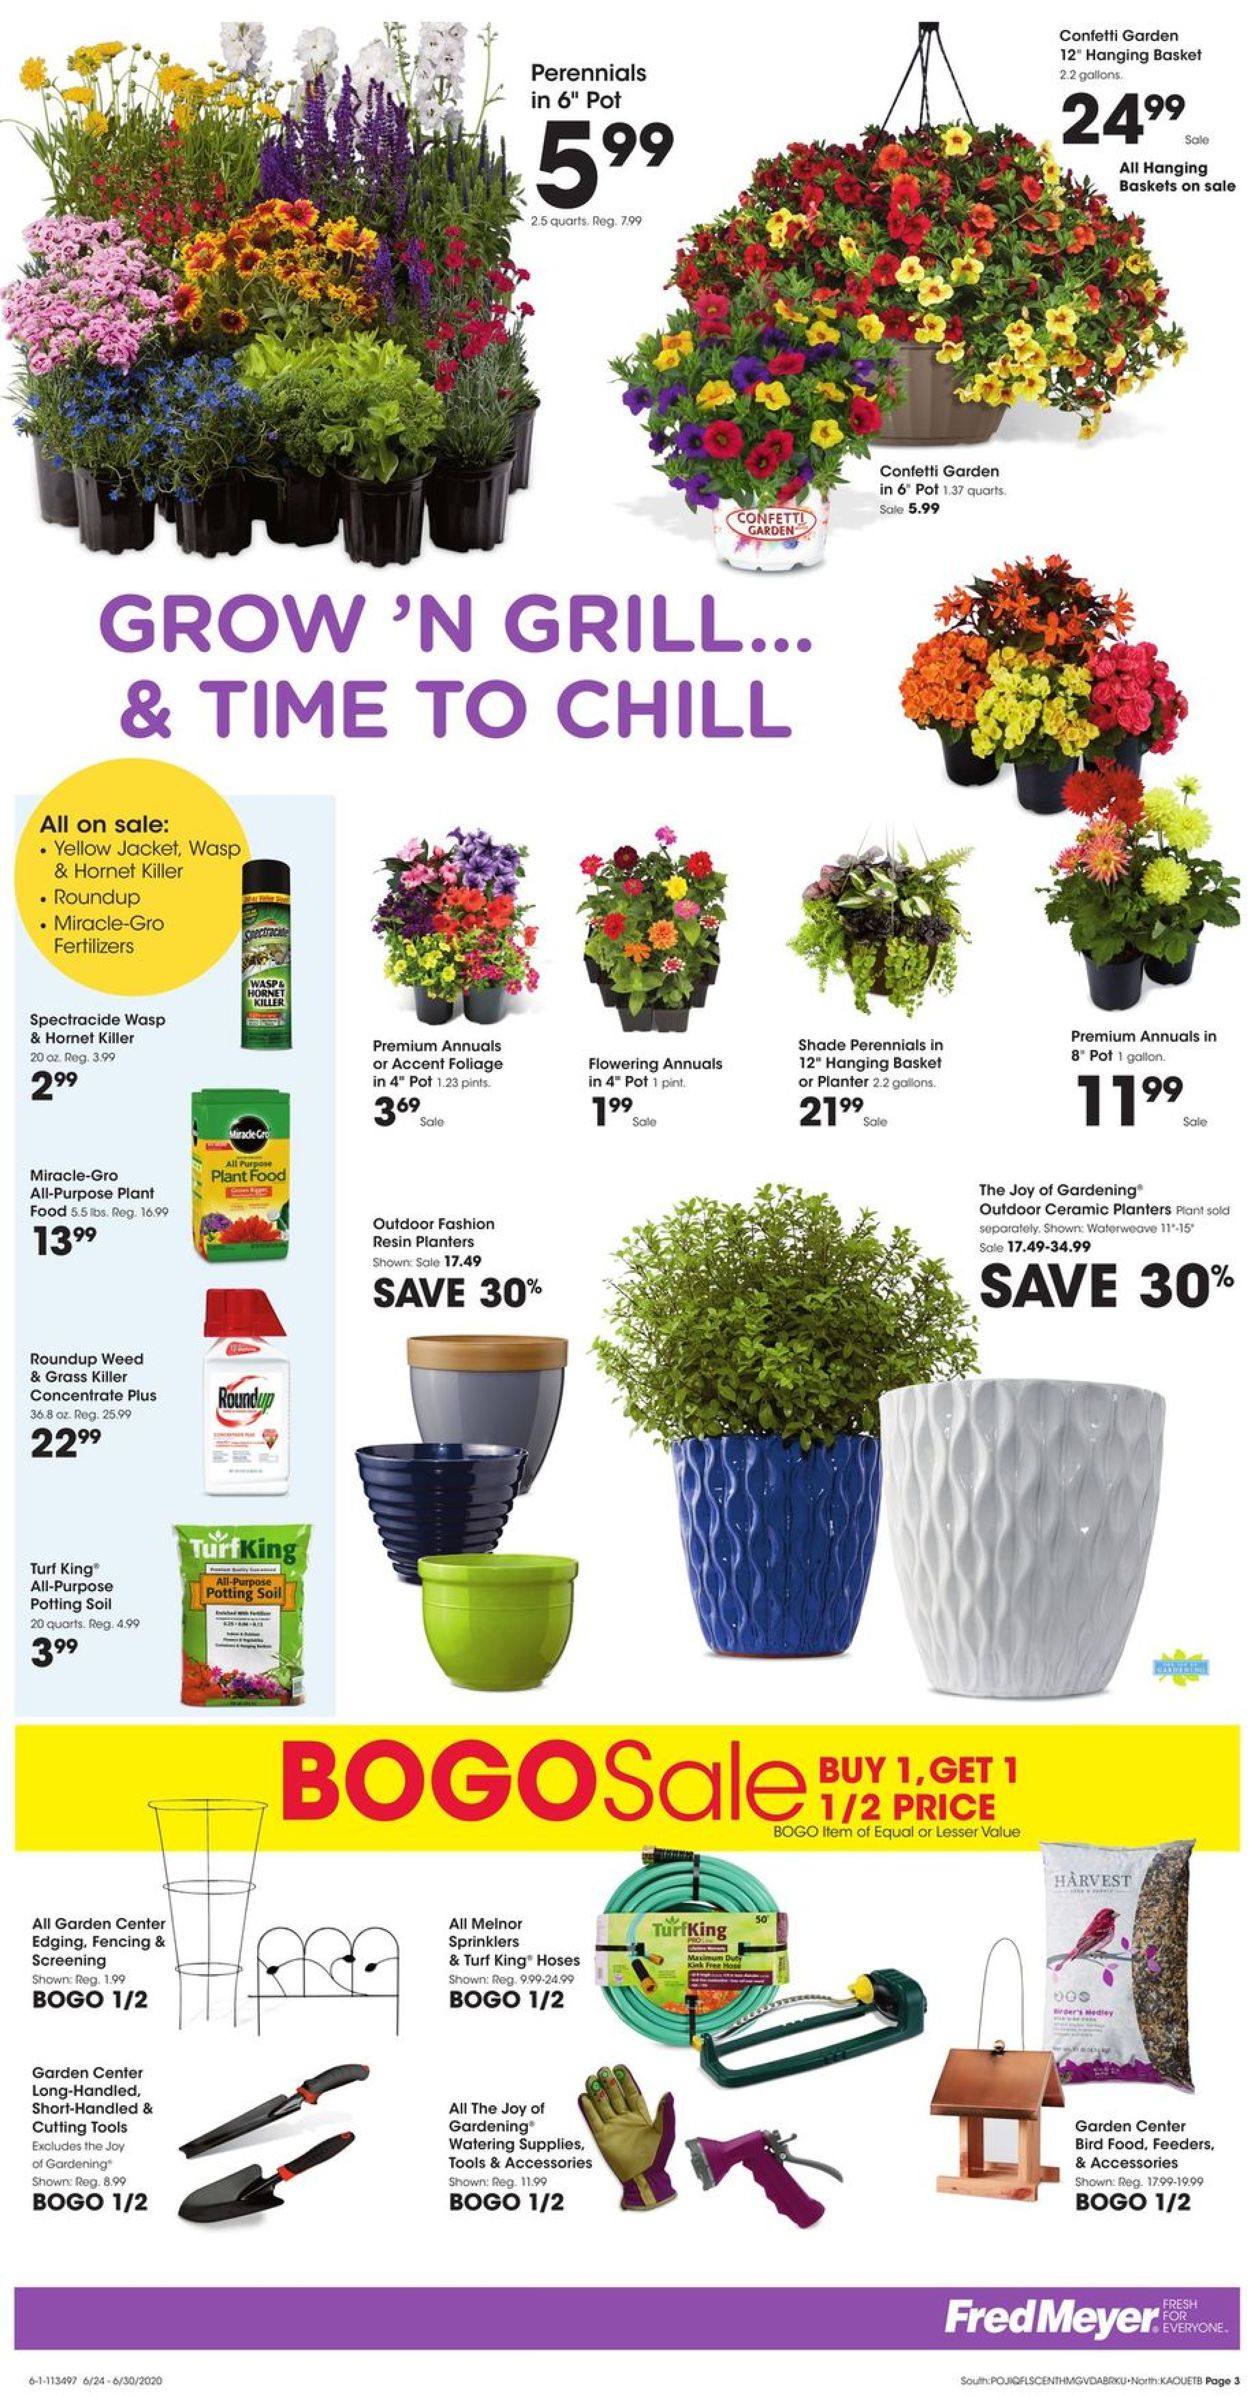 Fred Meyer Current Weekly Ad 0624 - 06302020 3 - Frequent-adscom